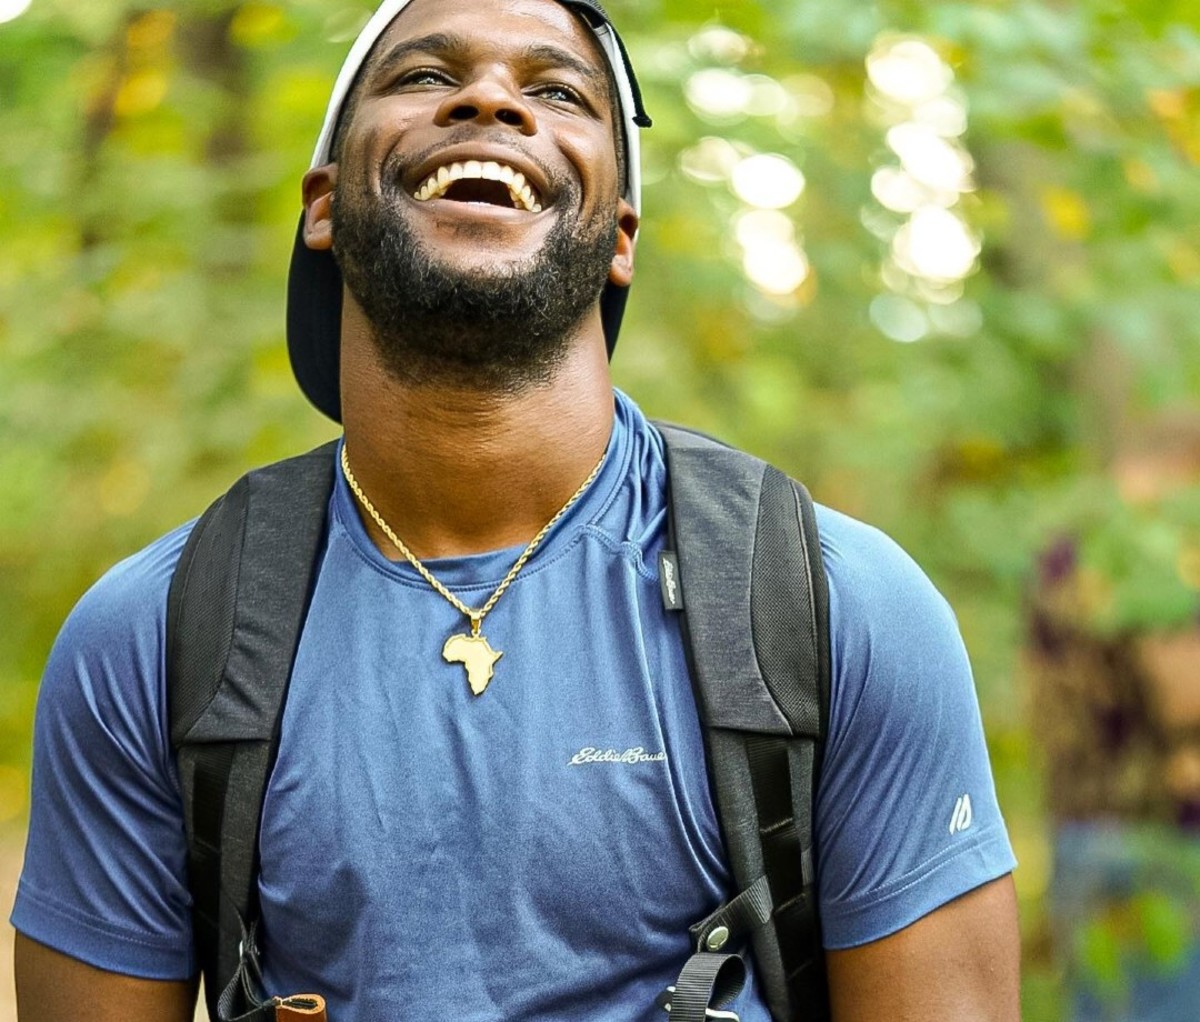 Black man in blue T-shirt and backpack laughing